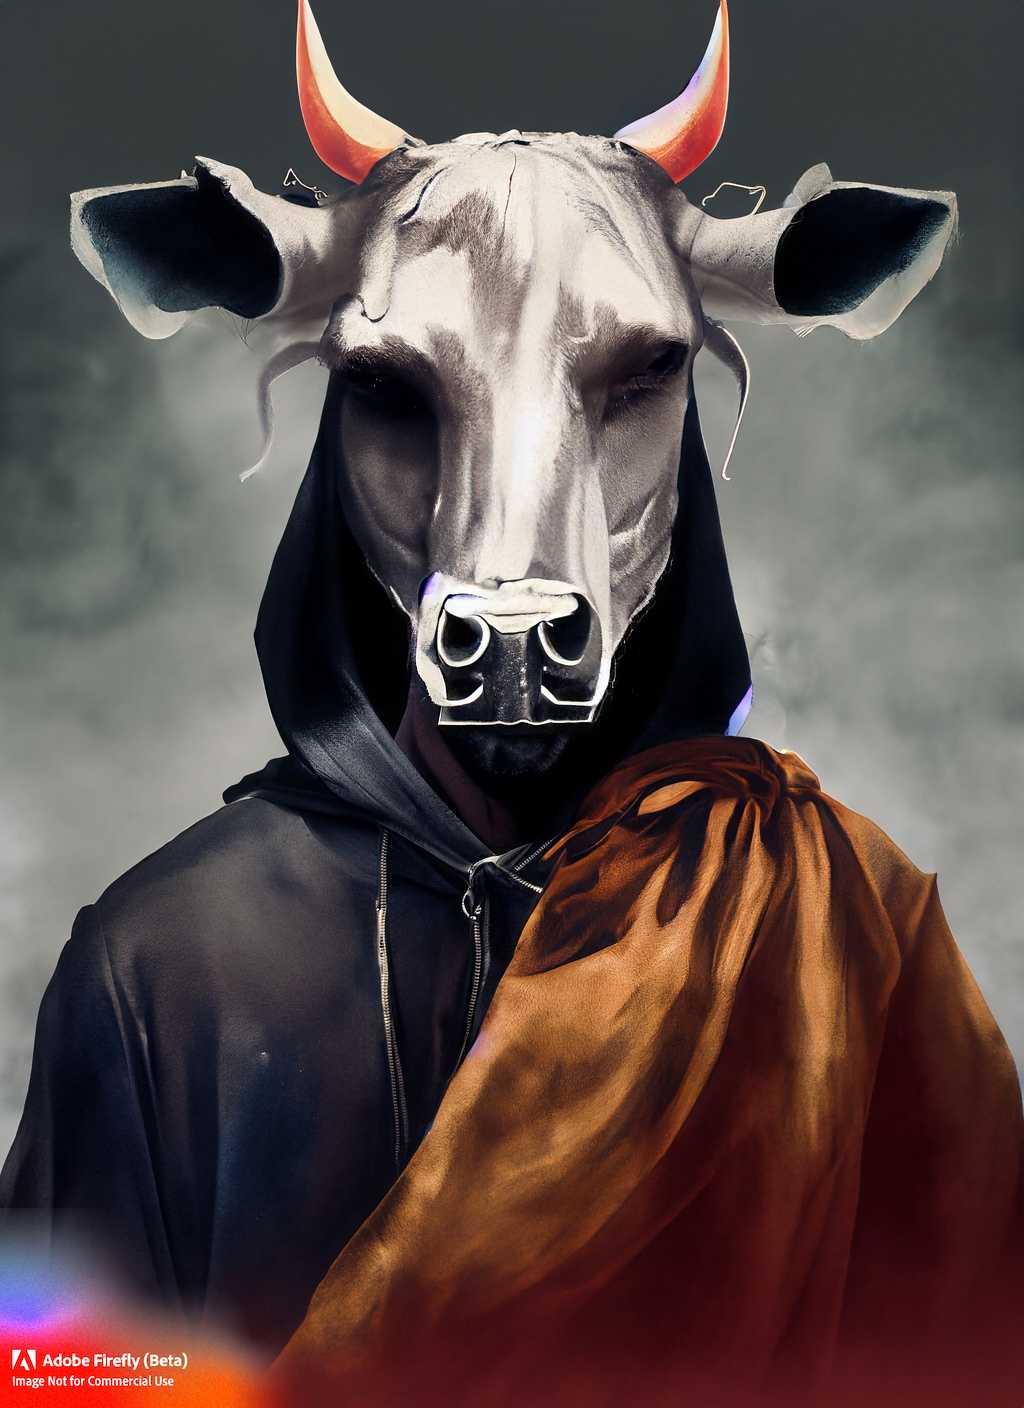 A Cowman made with Adobe Firefly AI